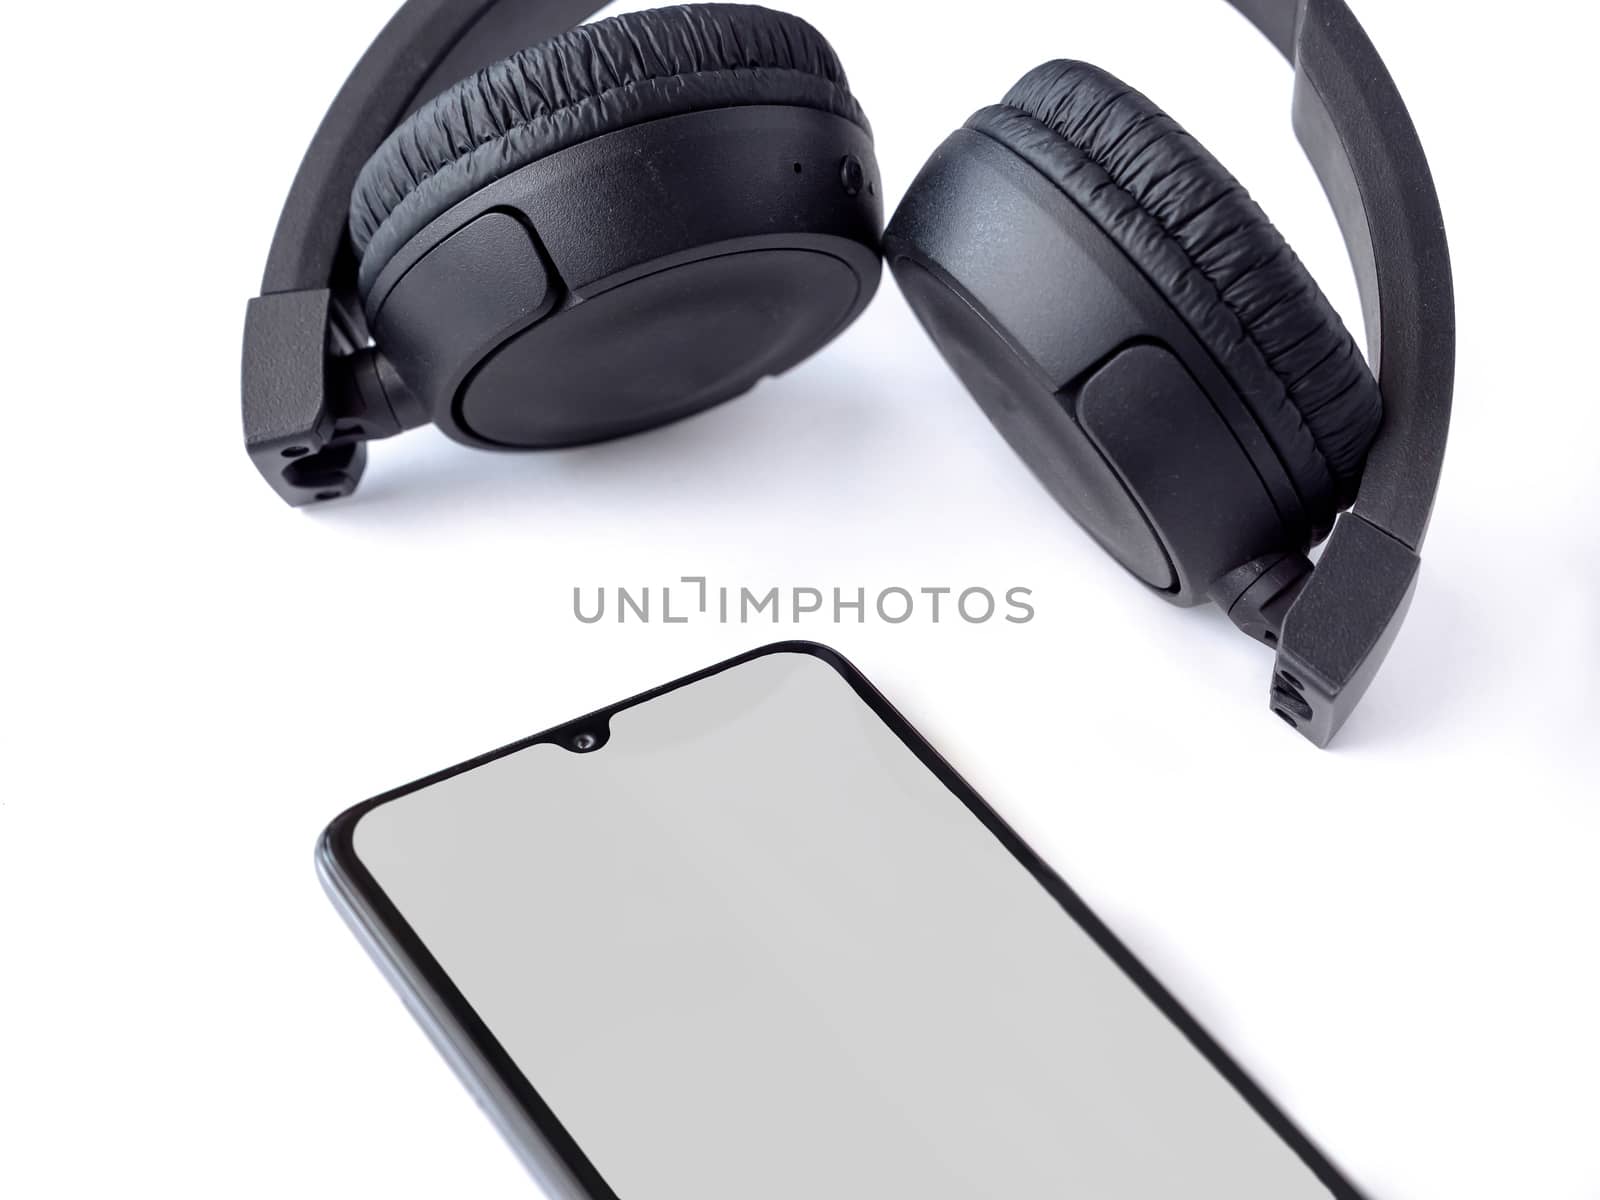 Black wireless headphone and mobile smartphone with a blank screen mockup lay on the surface of a white background by wavemovies